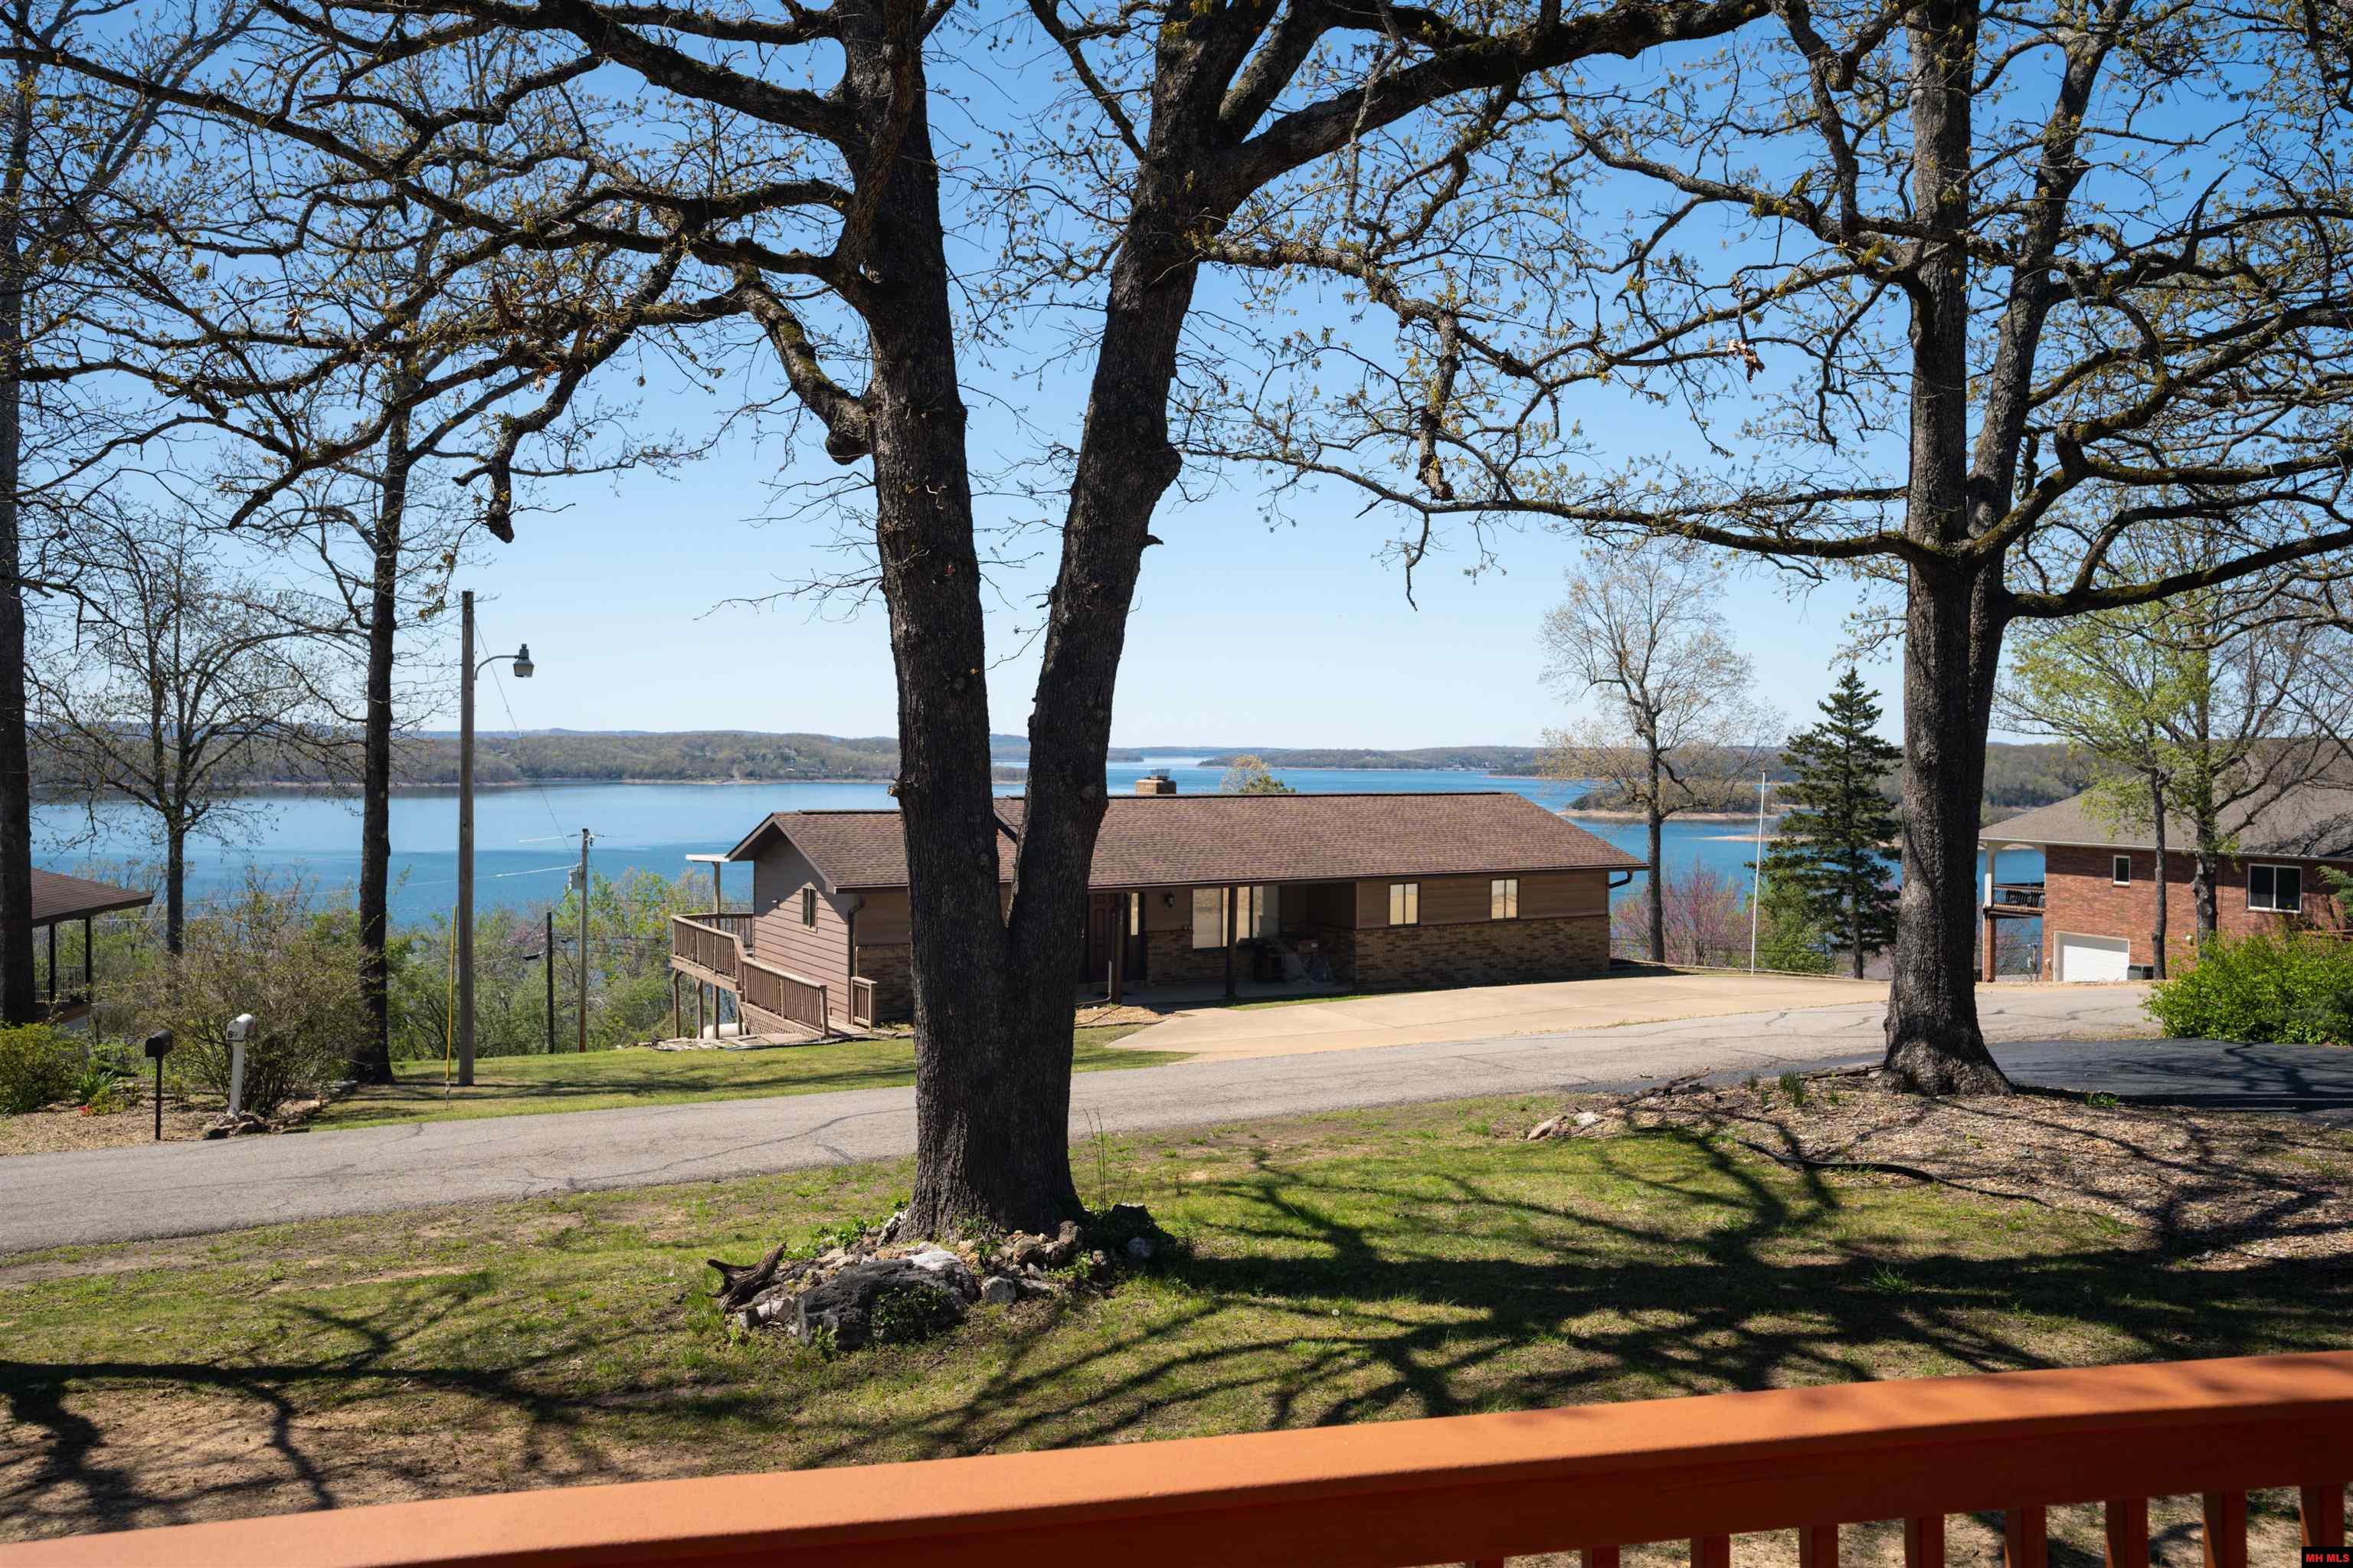 693 EDGEWOOD BAY DRIVE Lakeview, AR